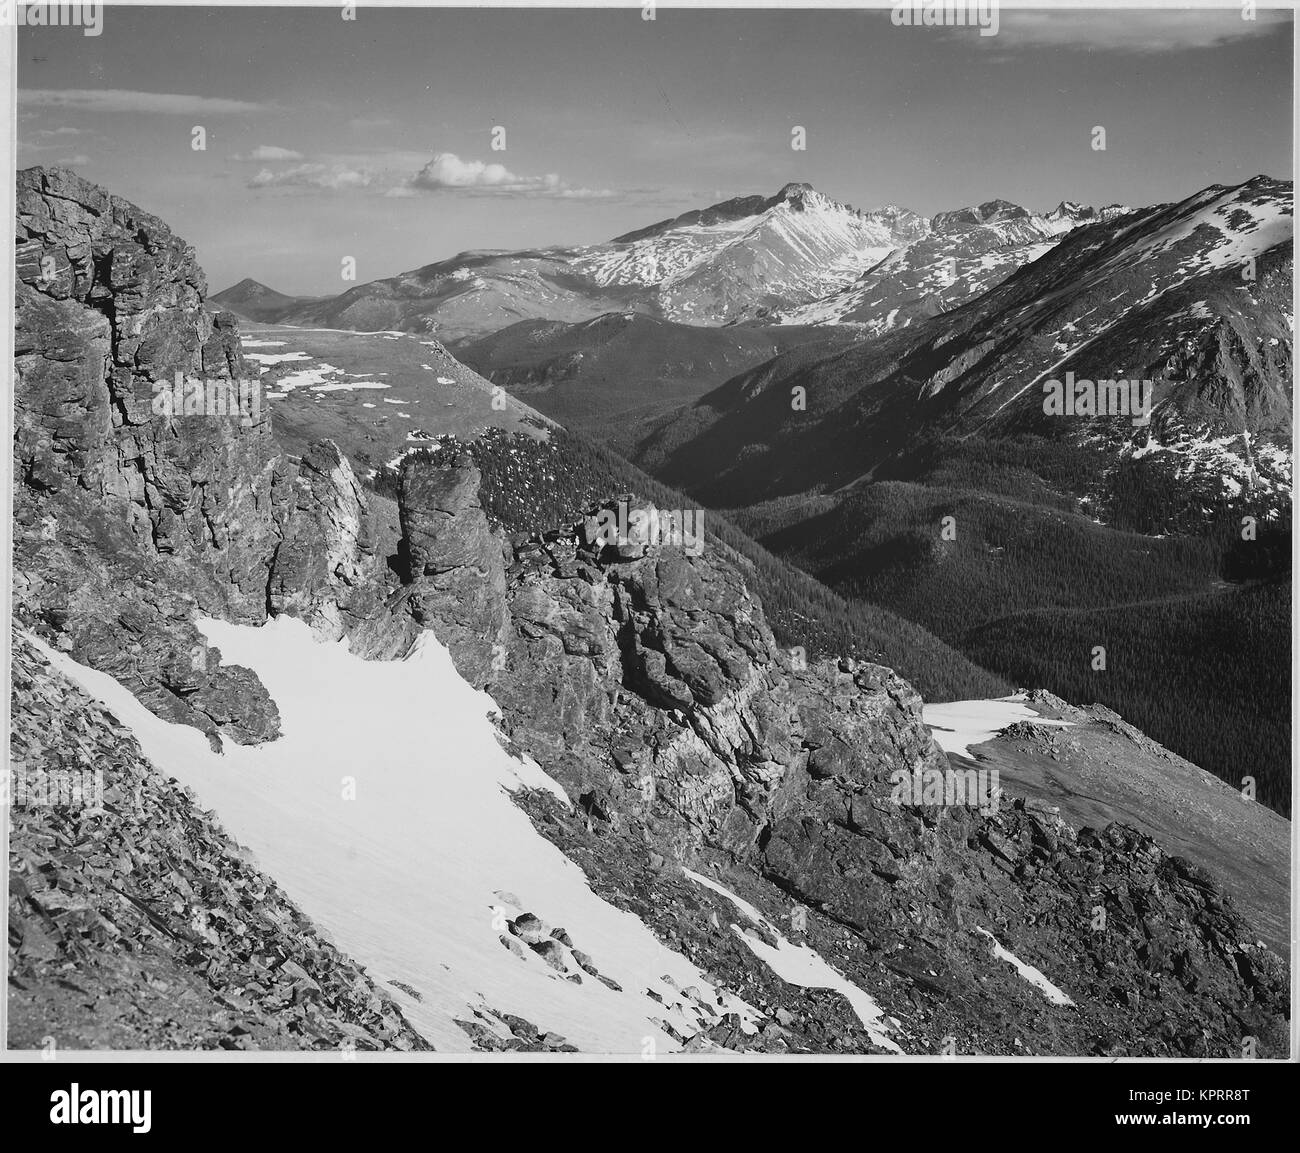 View of barren mountains with snow 'Long's Peak Rocky Mountain National Park' Colorado. 1933 - 1942 Stock Photo